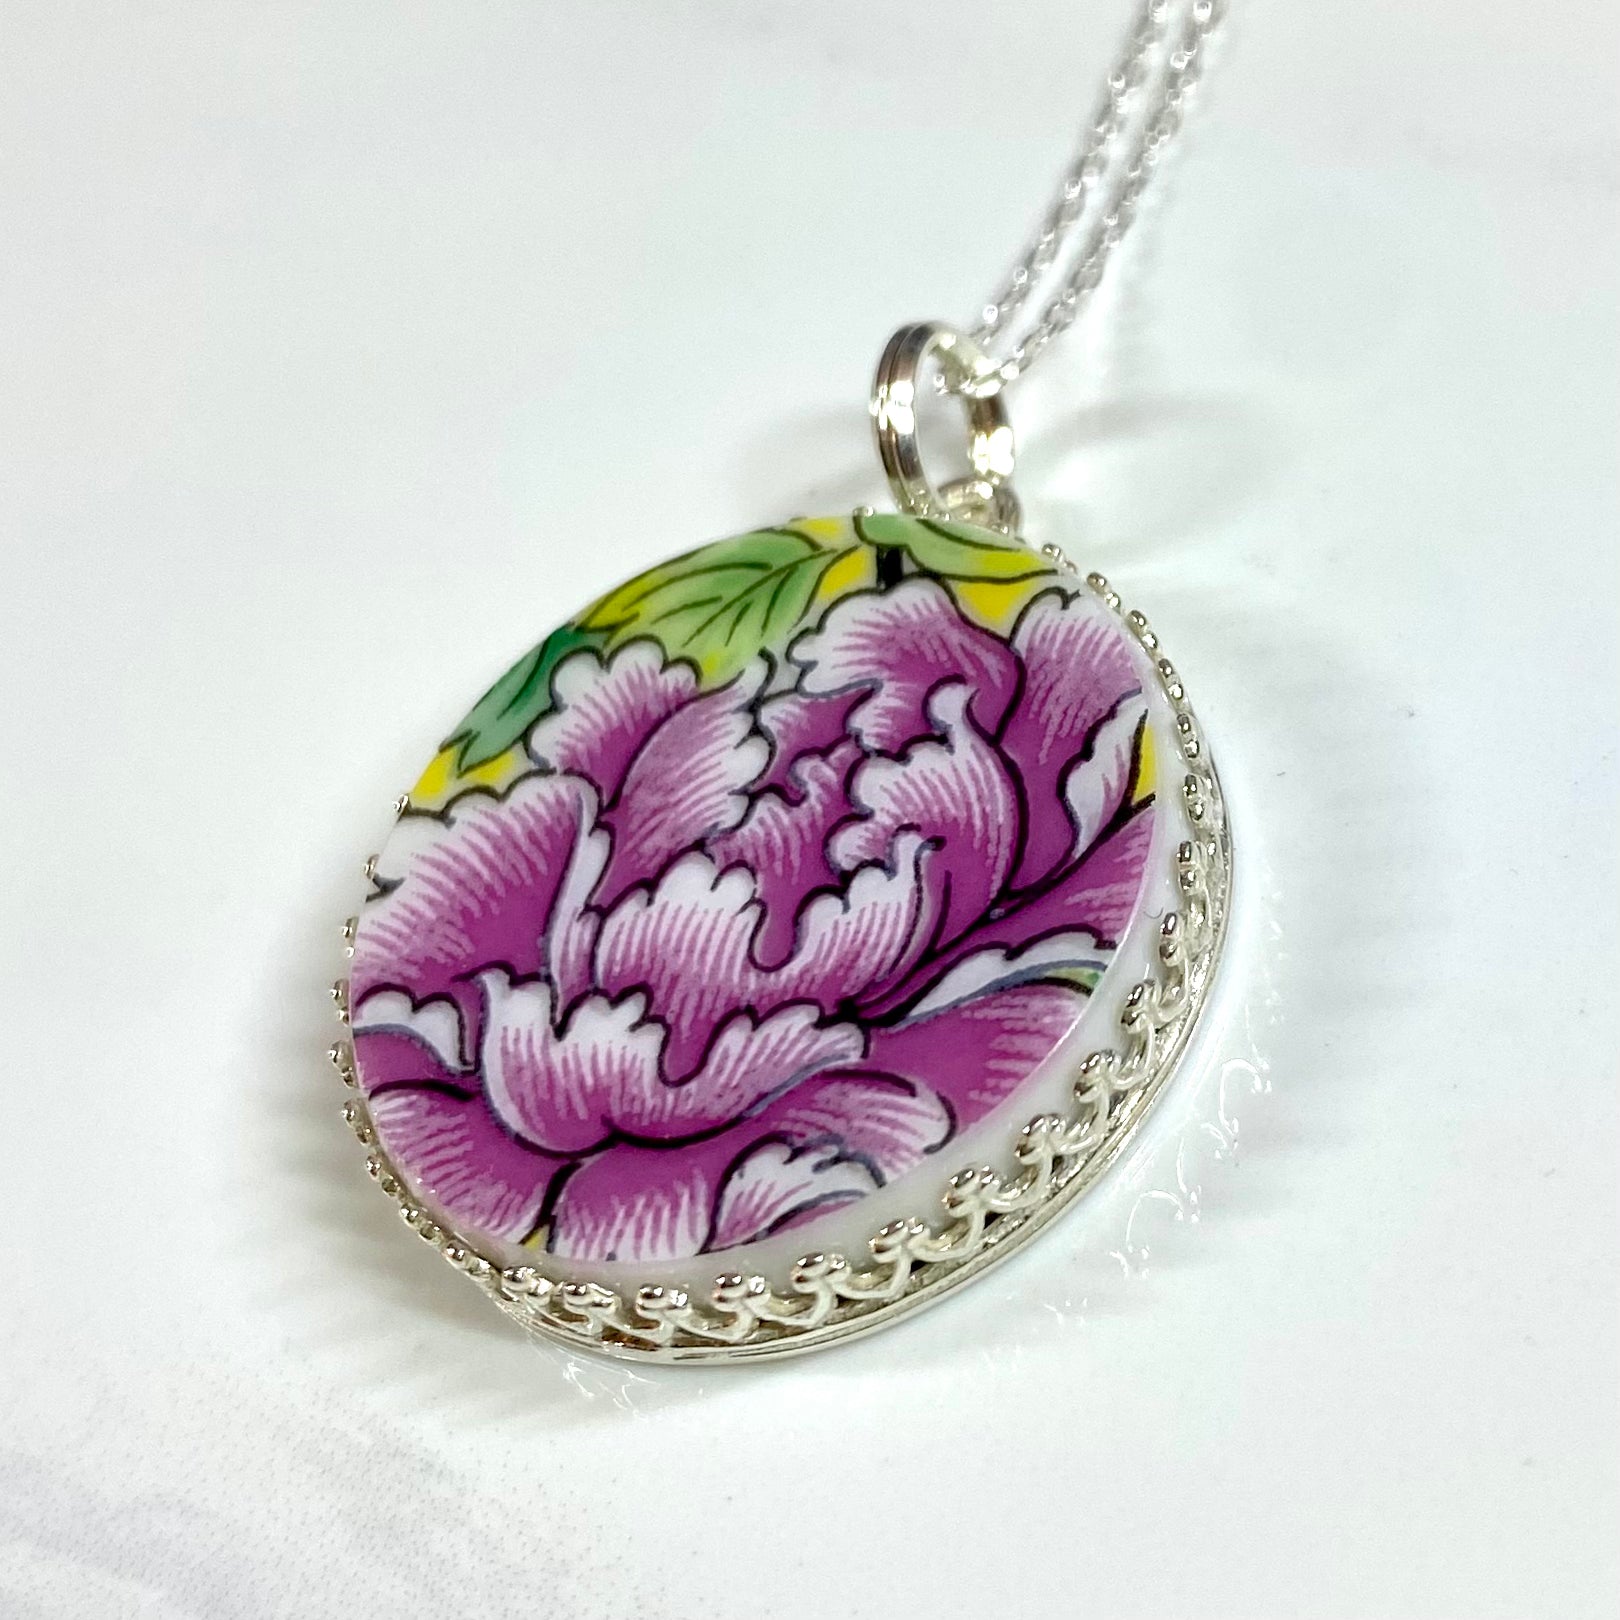 Lotus Flower Pendant Necklace Sterling Silver